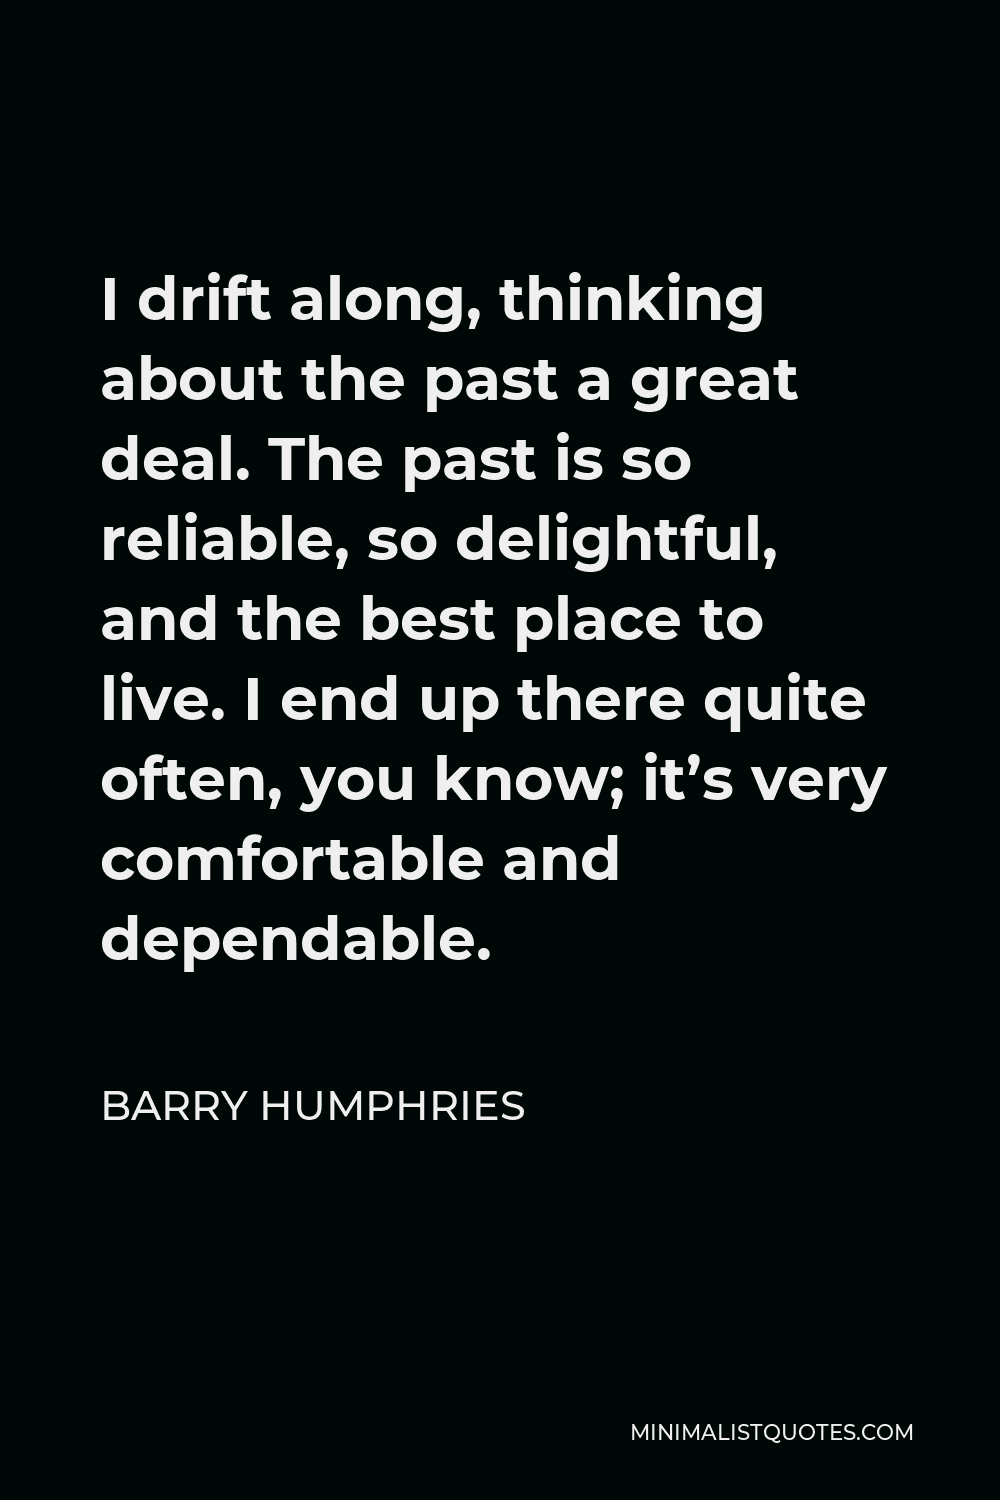 Barry Humphries Quote - I drift along, thinking about the past a great deal. The past is so reliable, so delightful, and the best place to live. I end up there quite often, you know; it’s very comfortable and dependable.